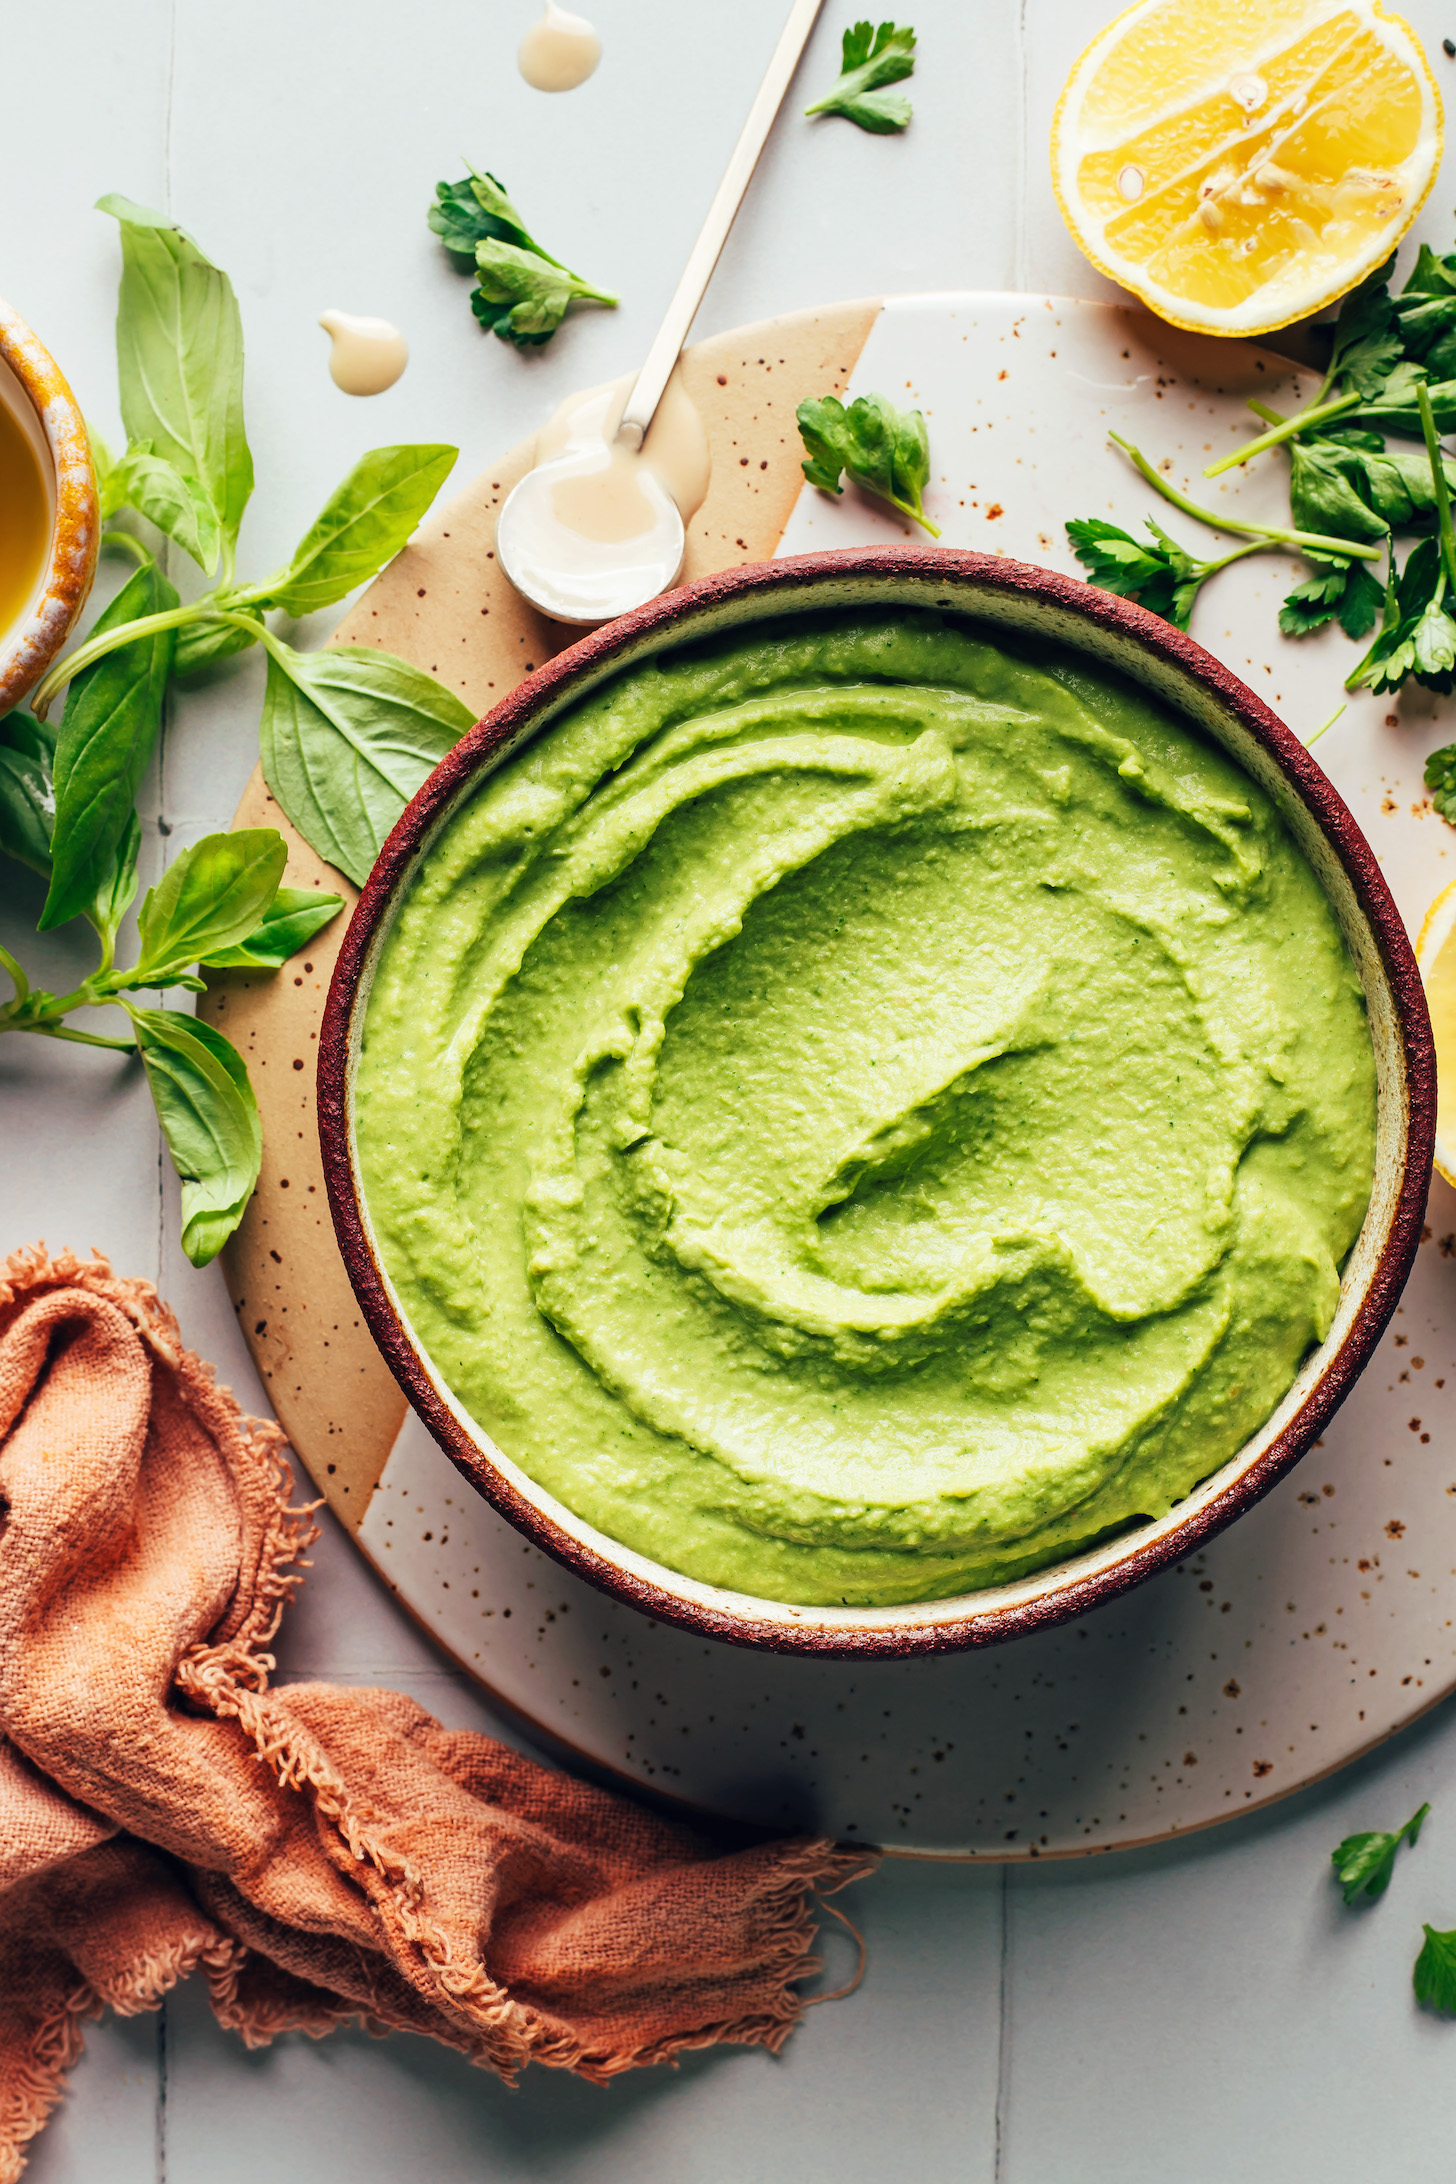 Vibrant green goddess hummus in a bowl surrounded by fresh herbs and lemon